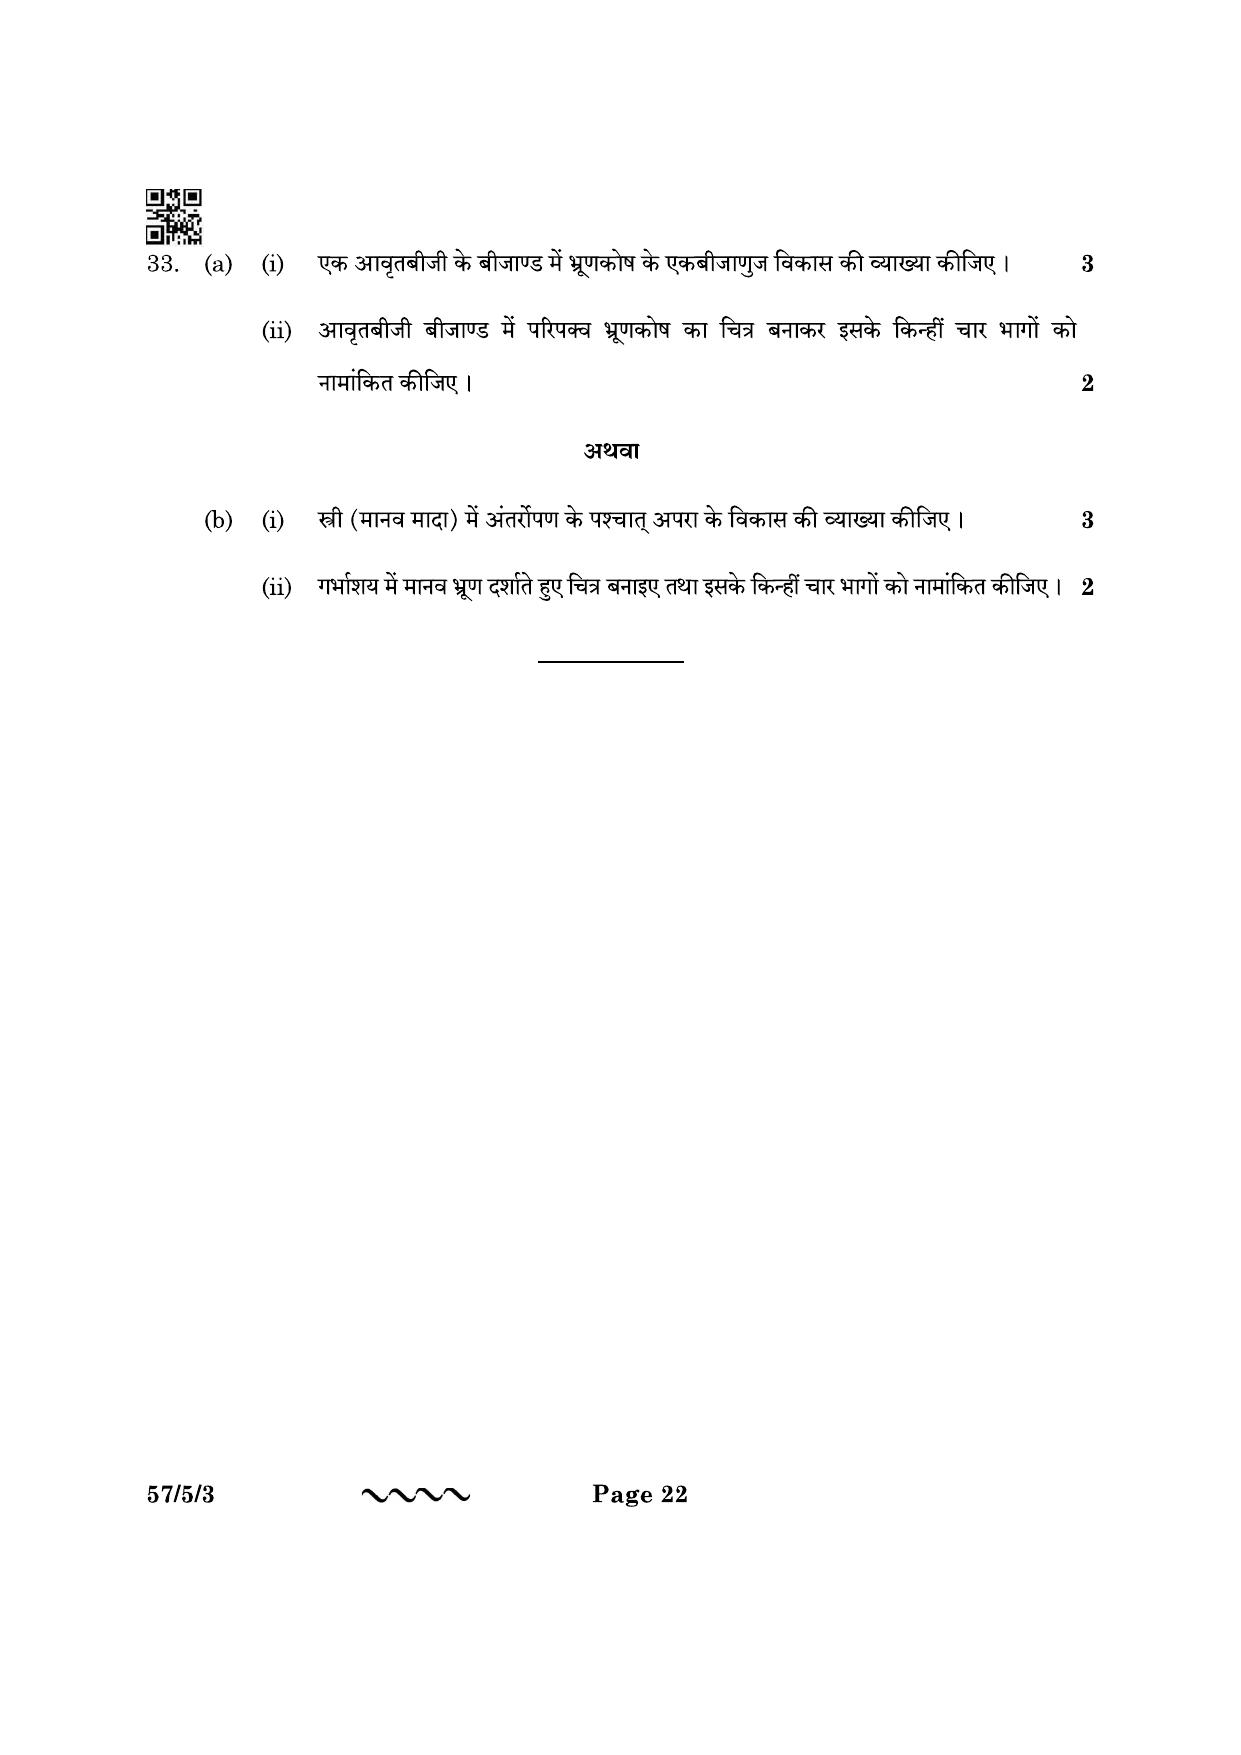 CBSE Class 12 57-5-3 Biology 2023 Question Paper - Page 22